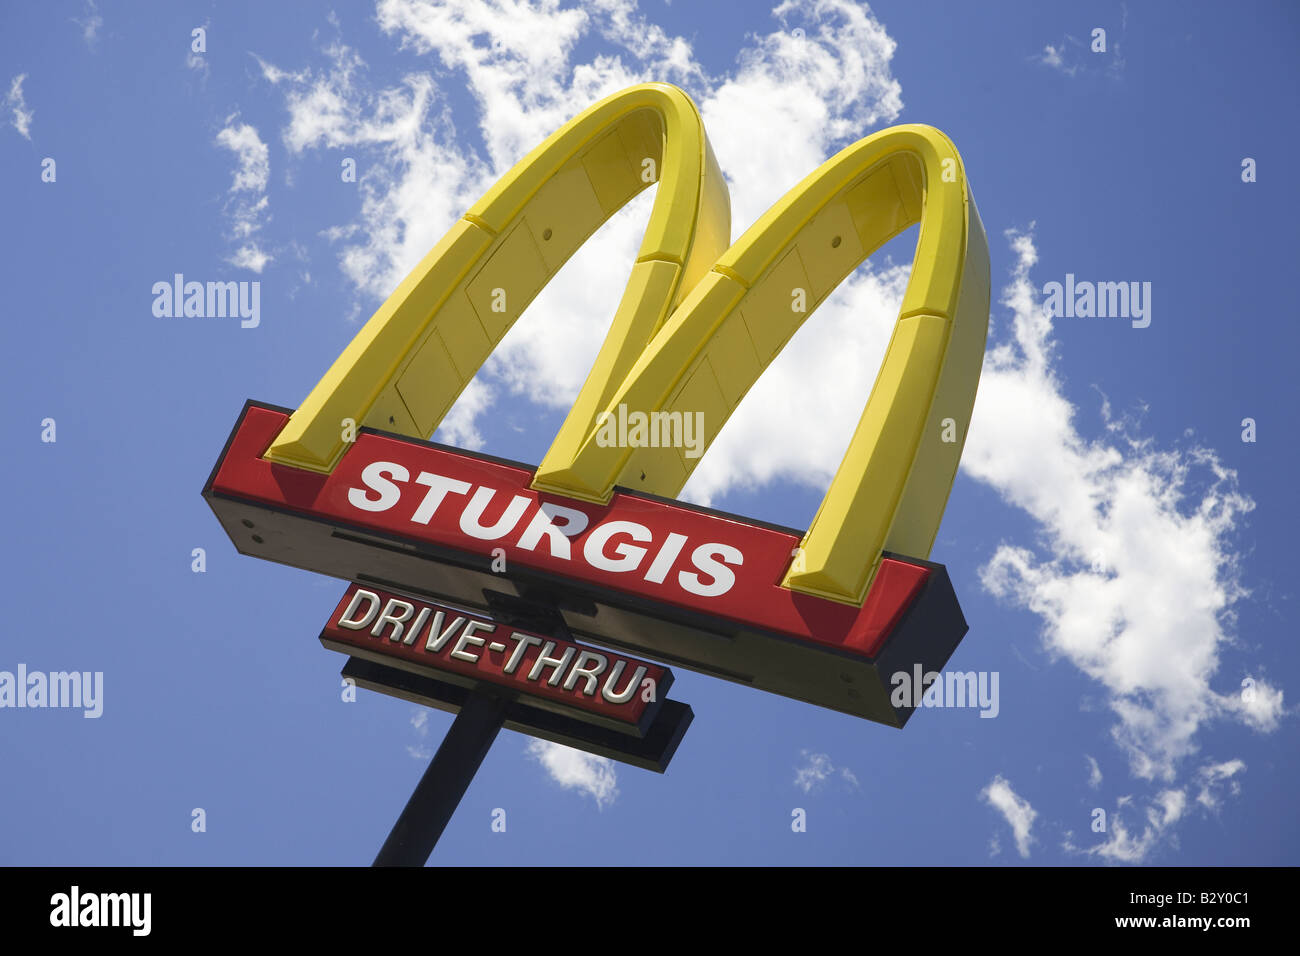 Sturgis McDonald's sign and blue sky at the 67th Annual Sturgis Motorcycle Rally, SD Stock Photo